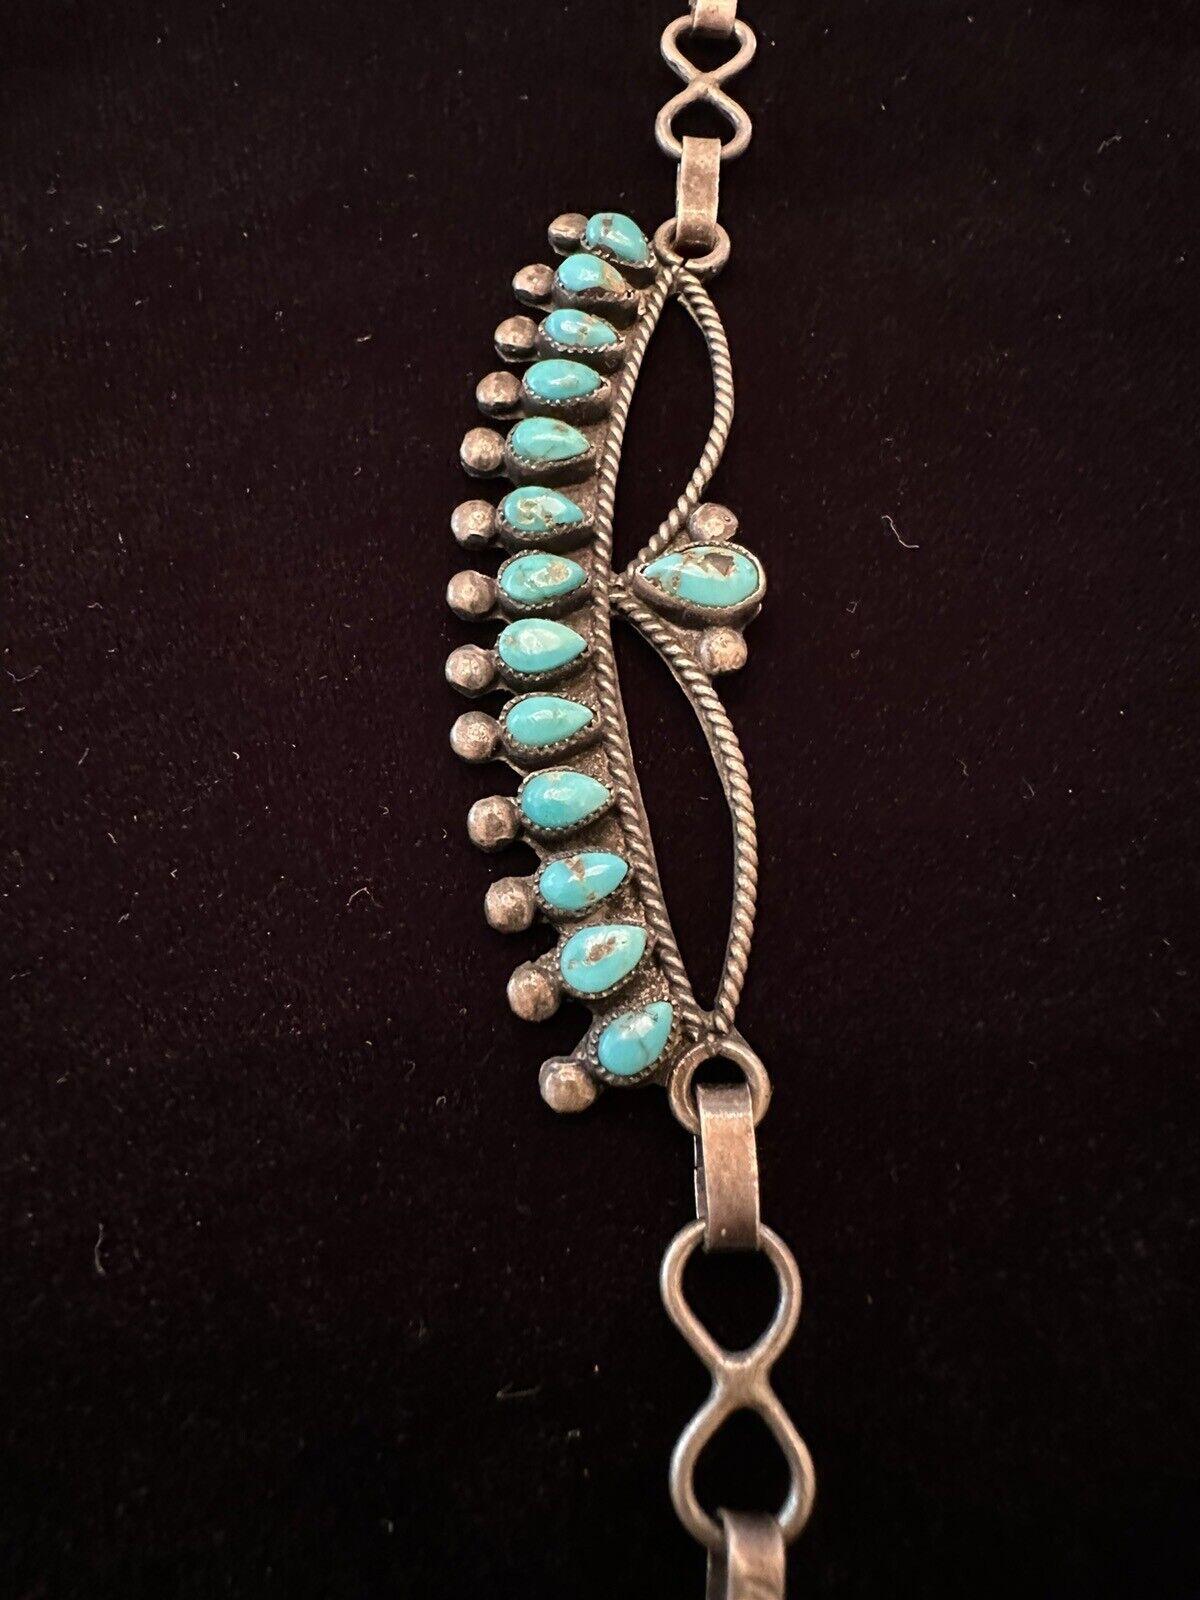 Vintage Zuni Native American Turquoise Sterling Silver Squash Blossom Necklace In Excellent Condition For Sale In Montreal, QC